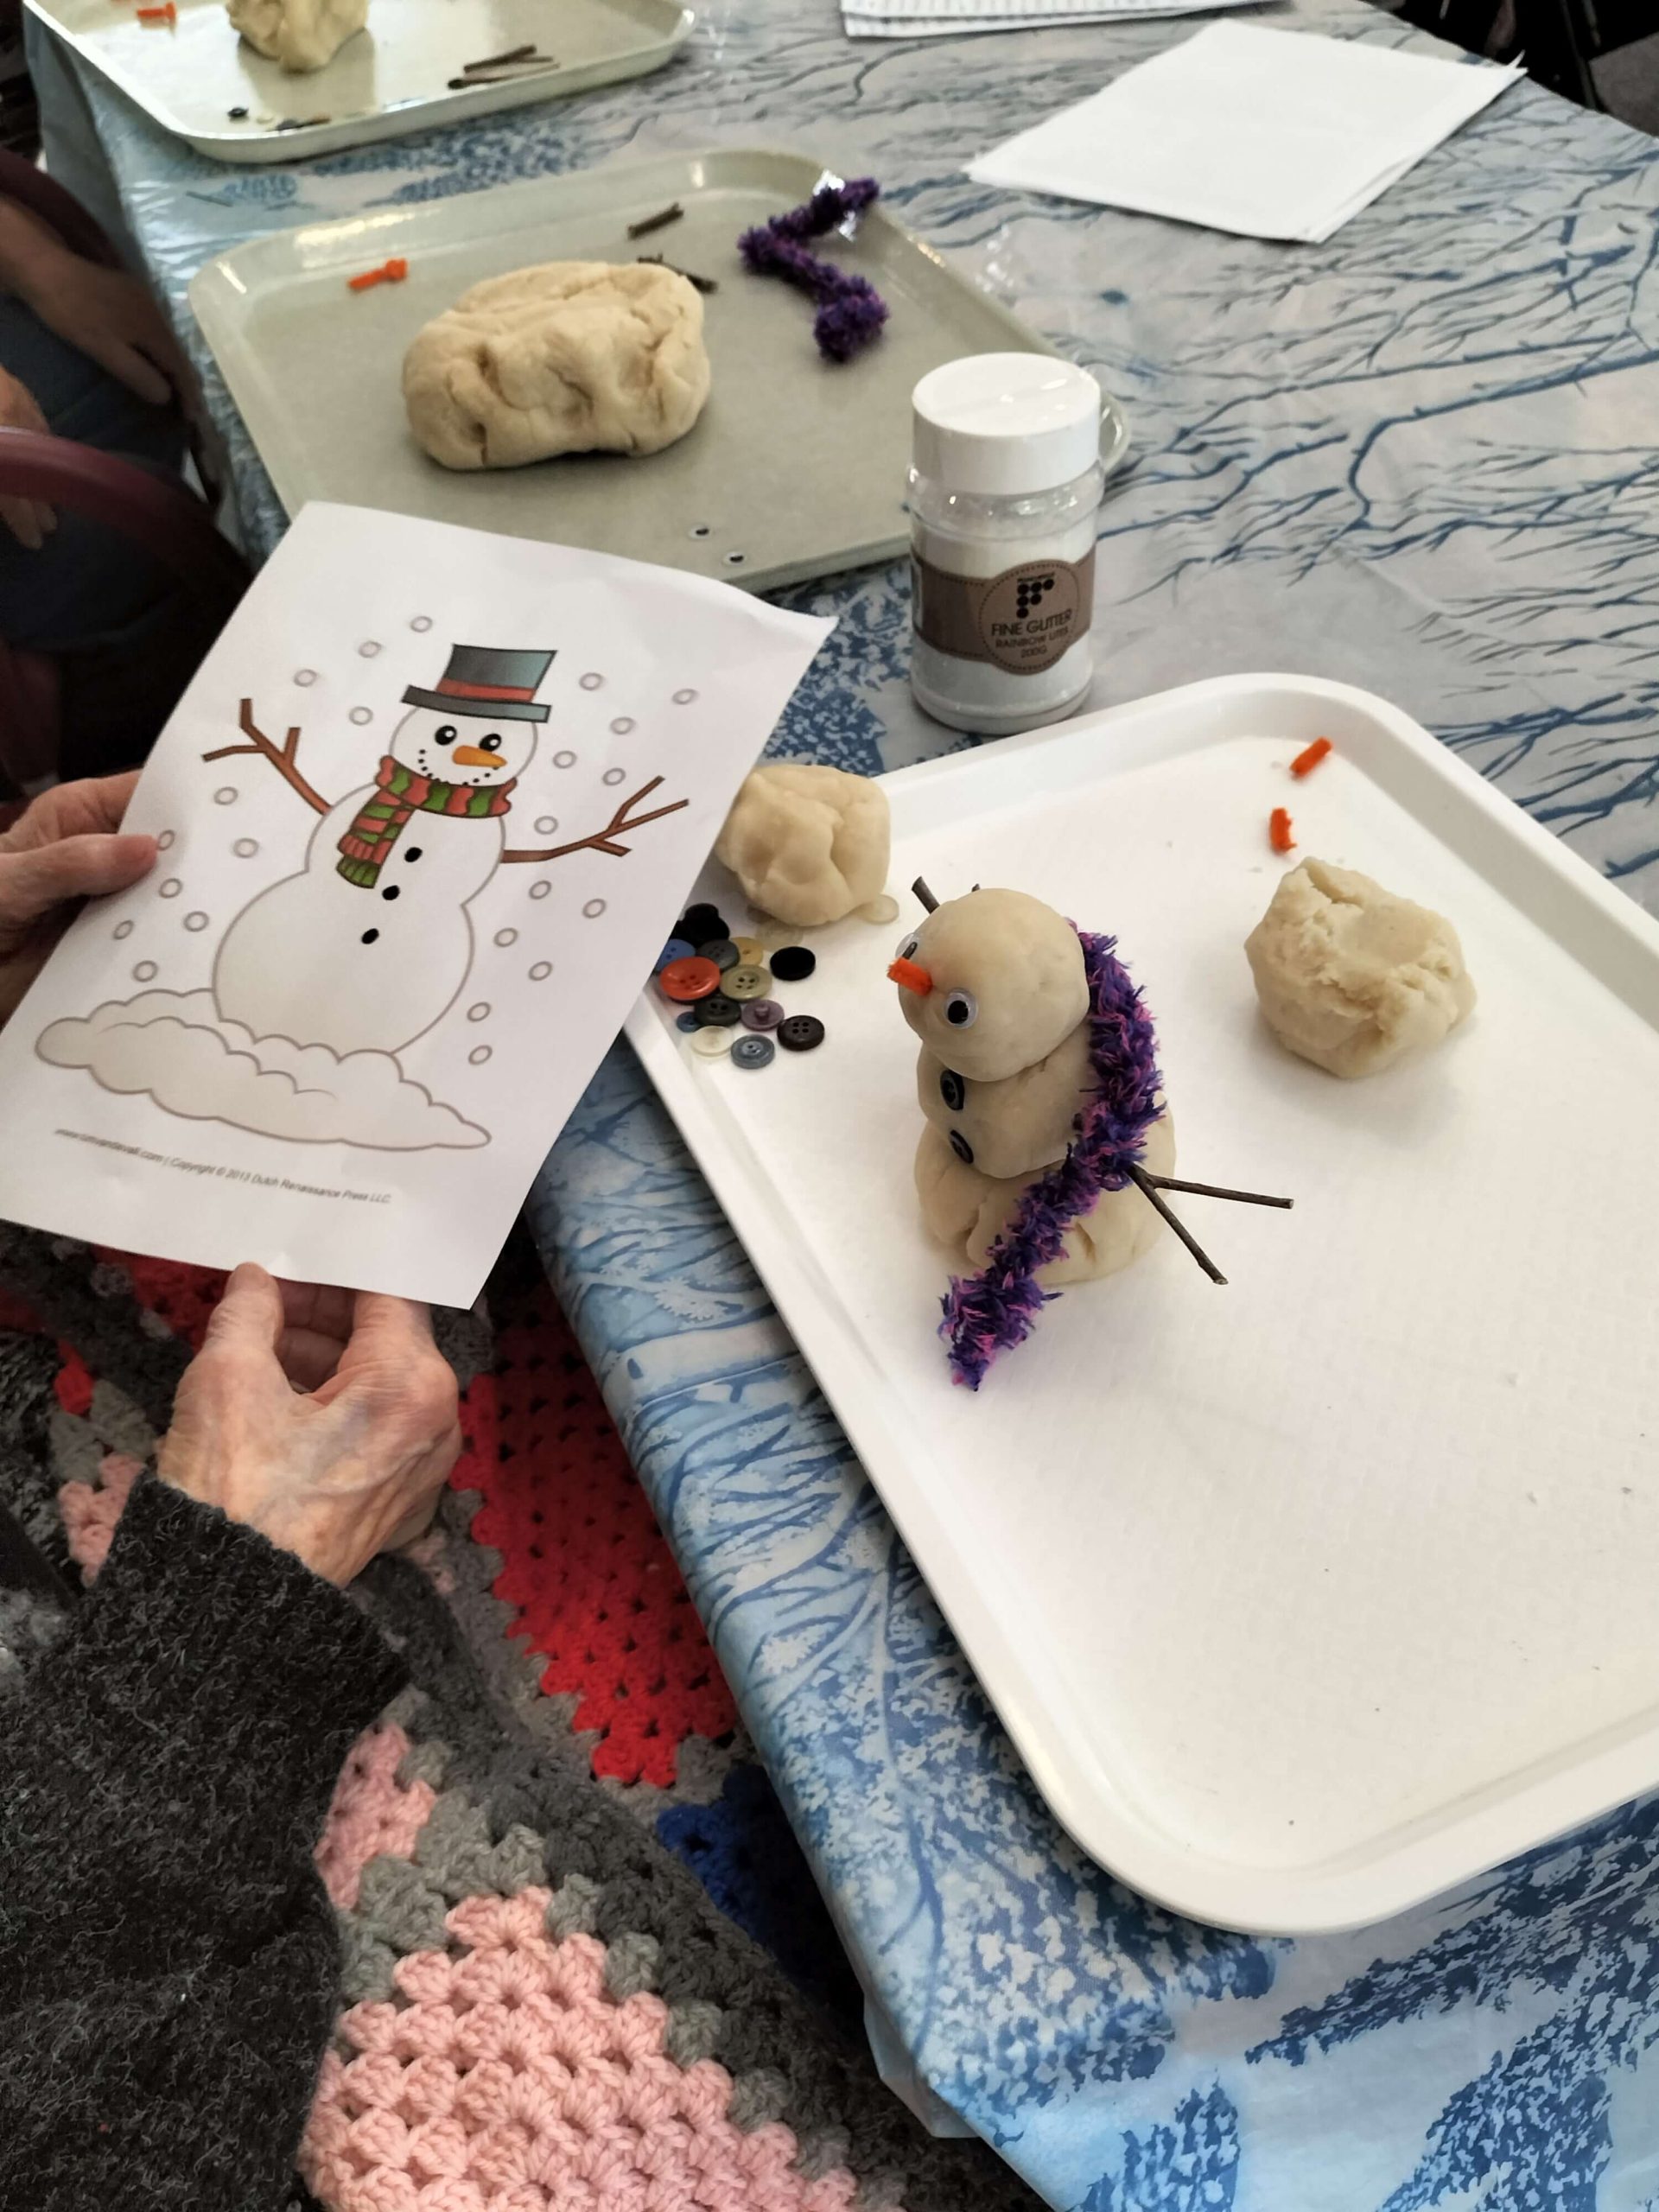 Photo of craft activity at Yallambee Aged Care, making snowman out of dough and decorating it.